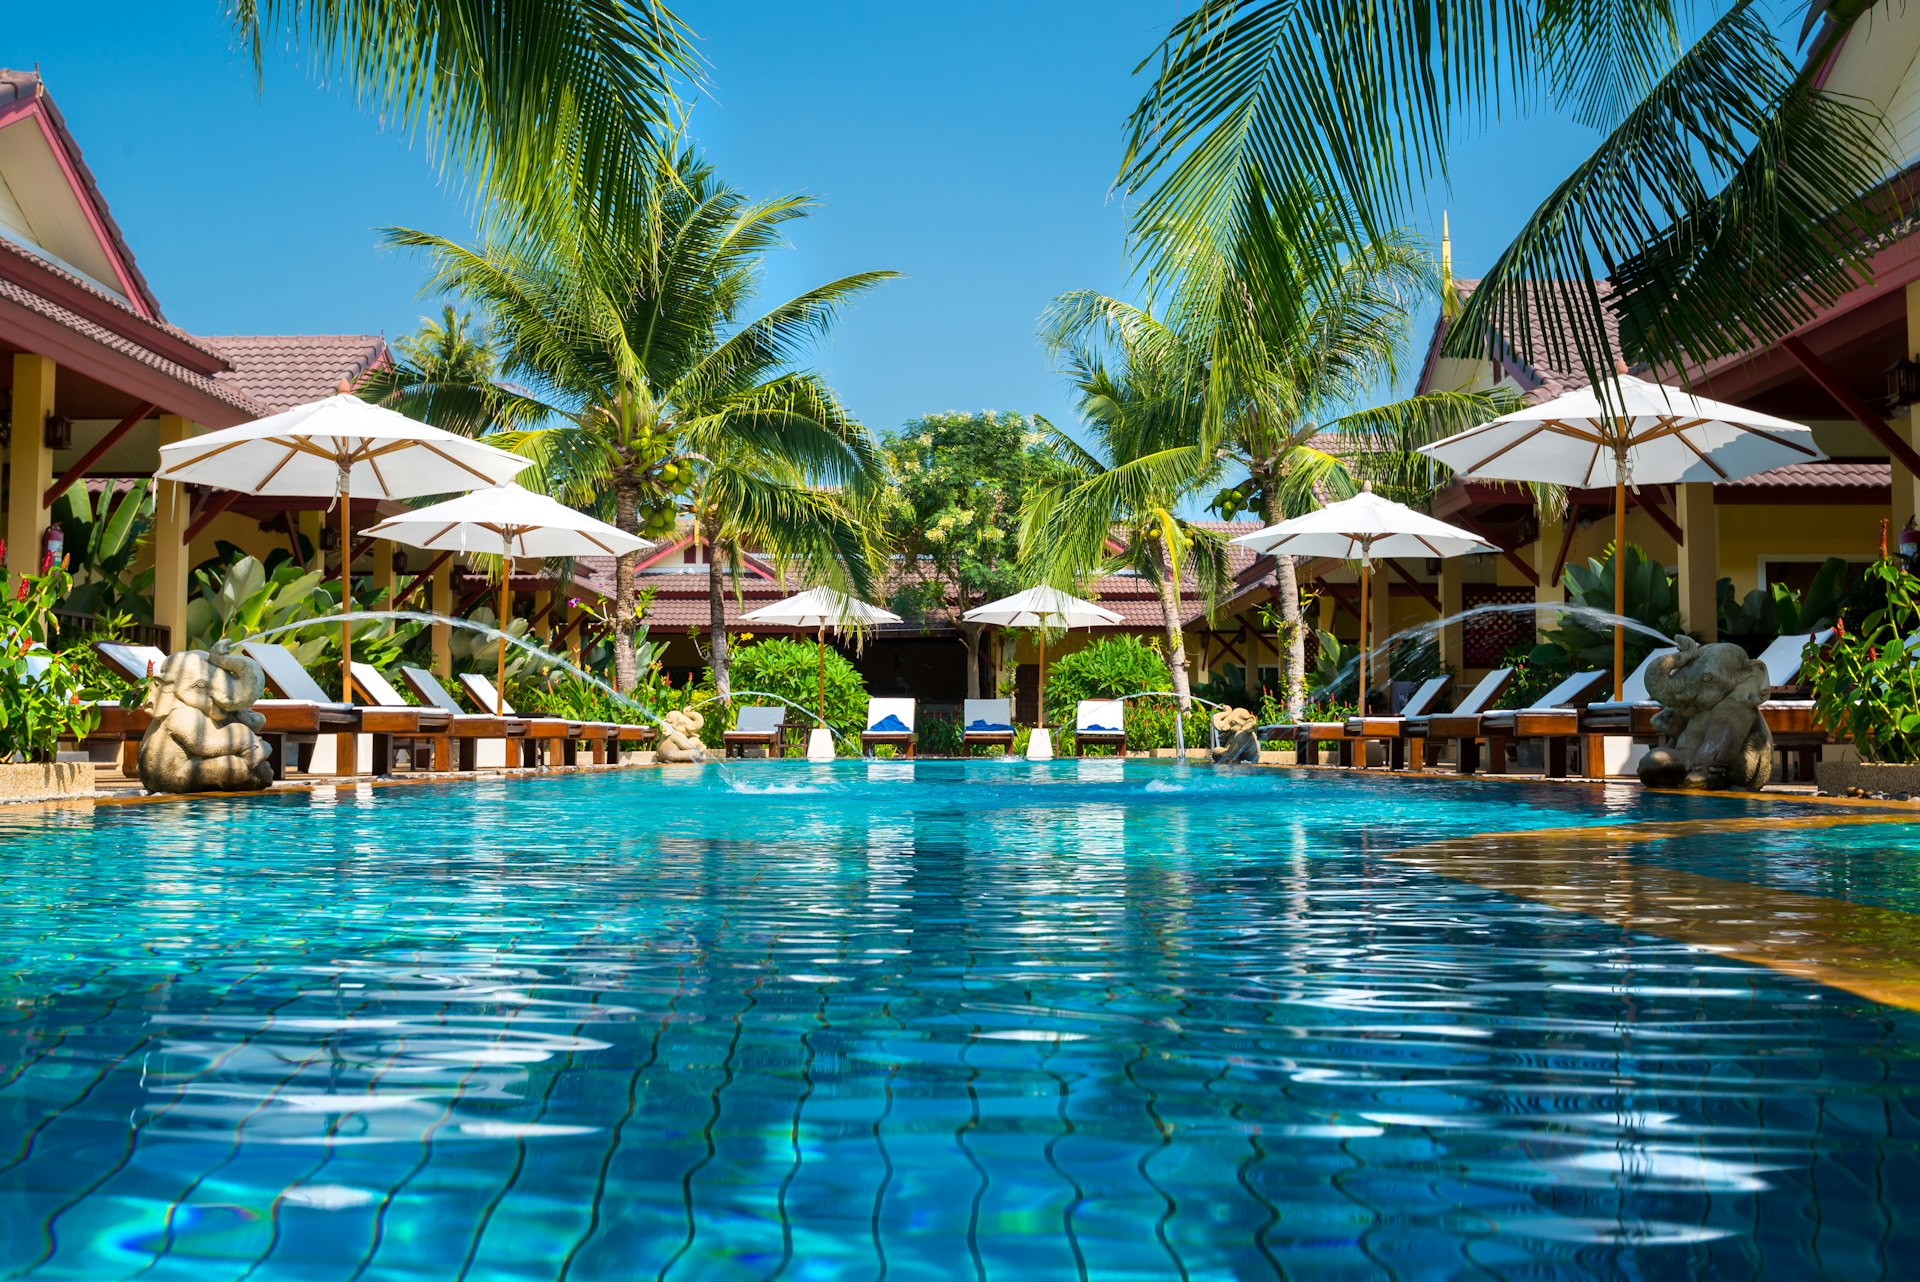 A beautiful swimming pool is surrounded by cabanas at a tropical resort. 